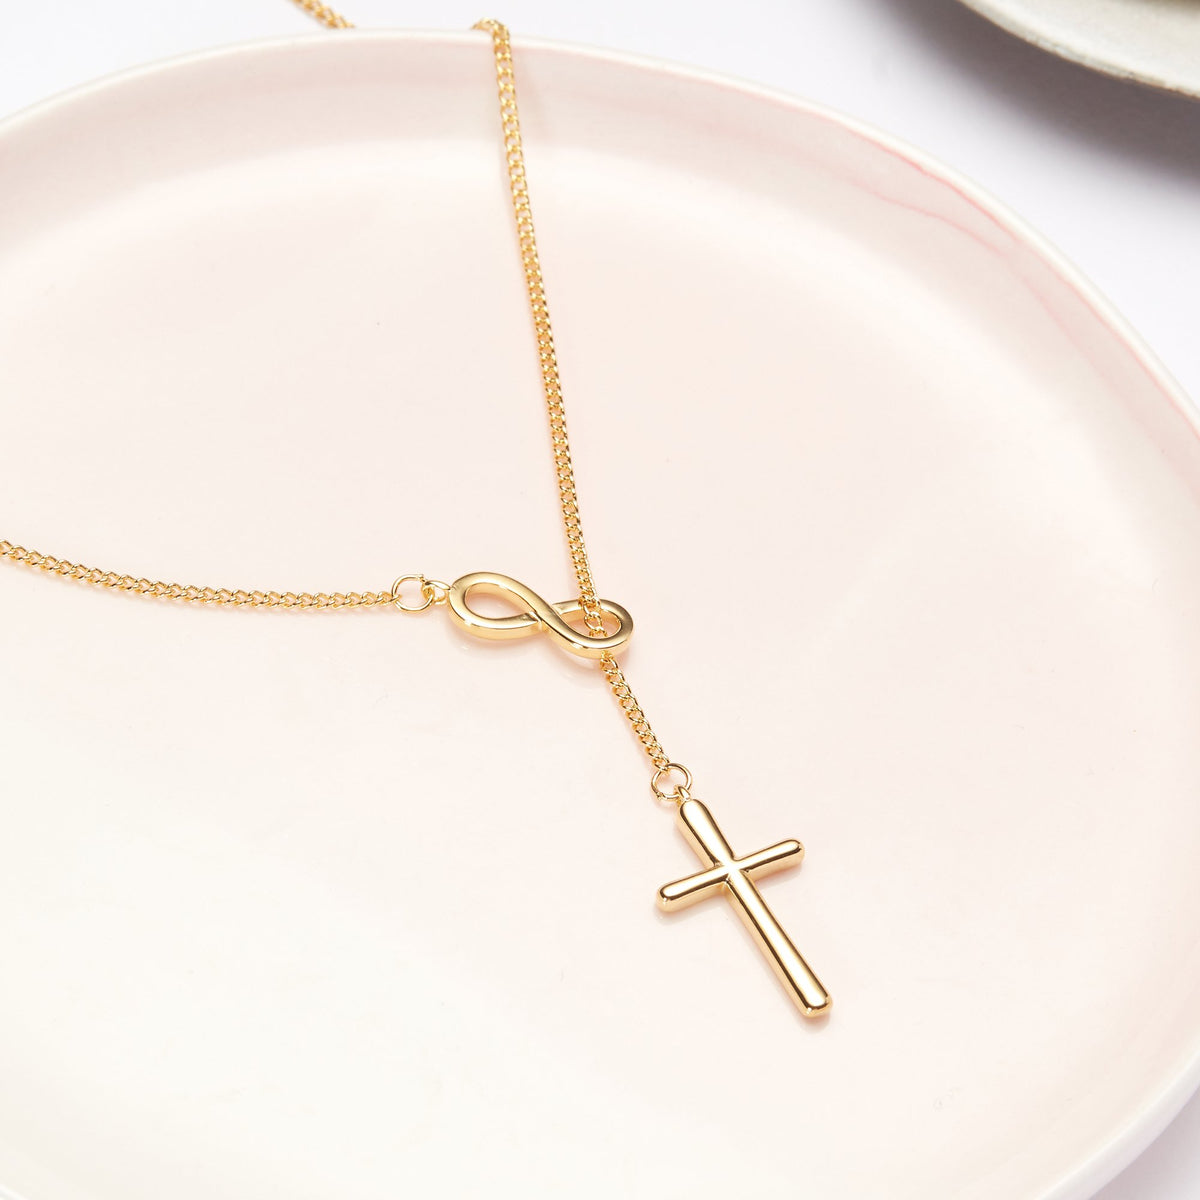 Christmas Gift for Great Grandma Infinity Cross  Necklace